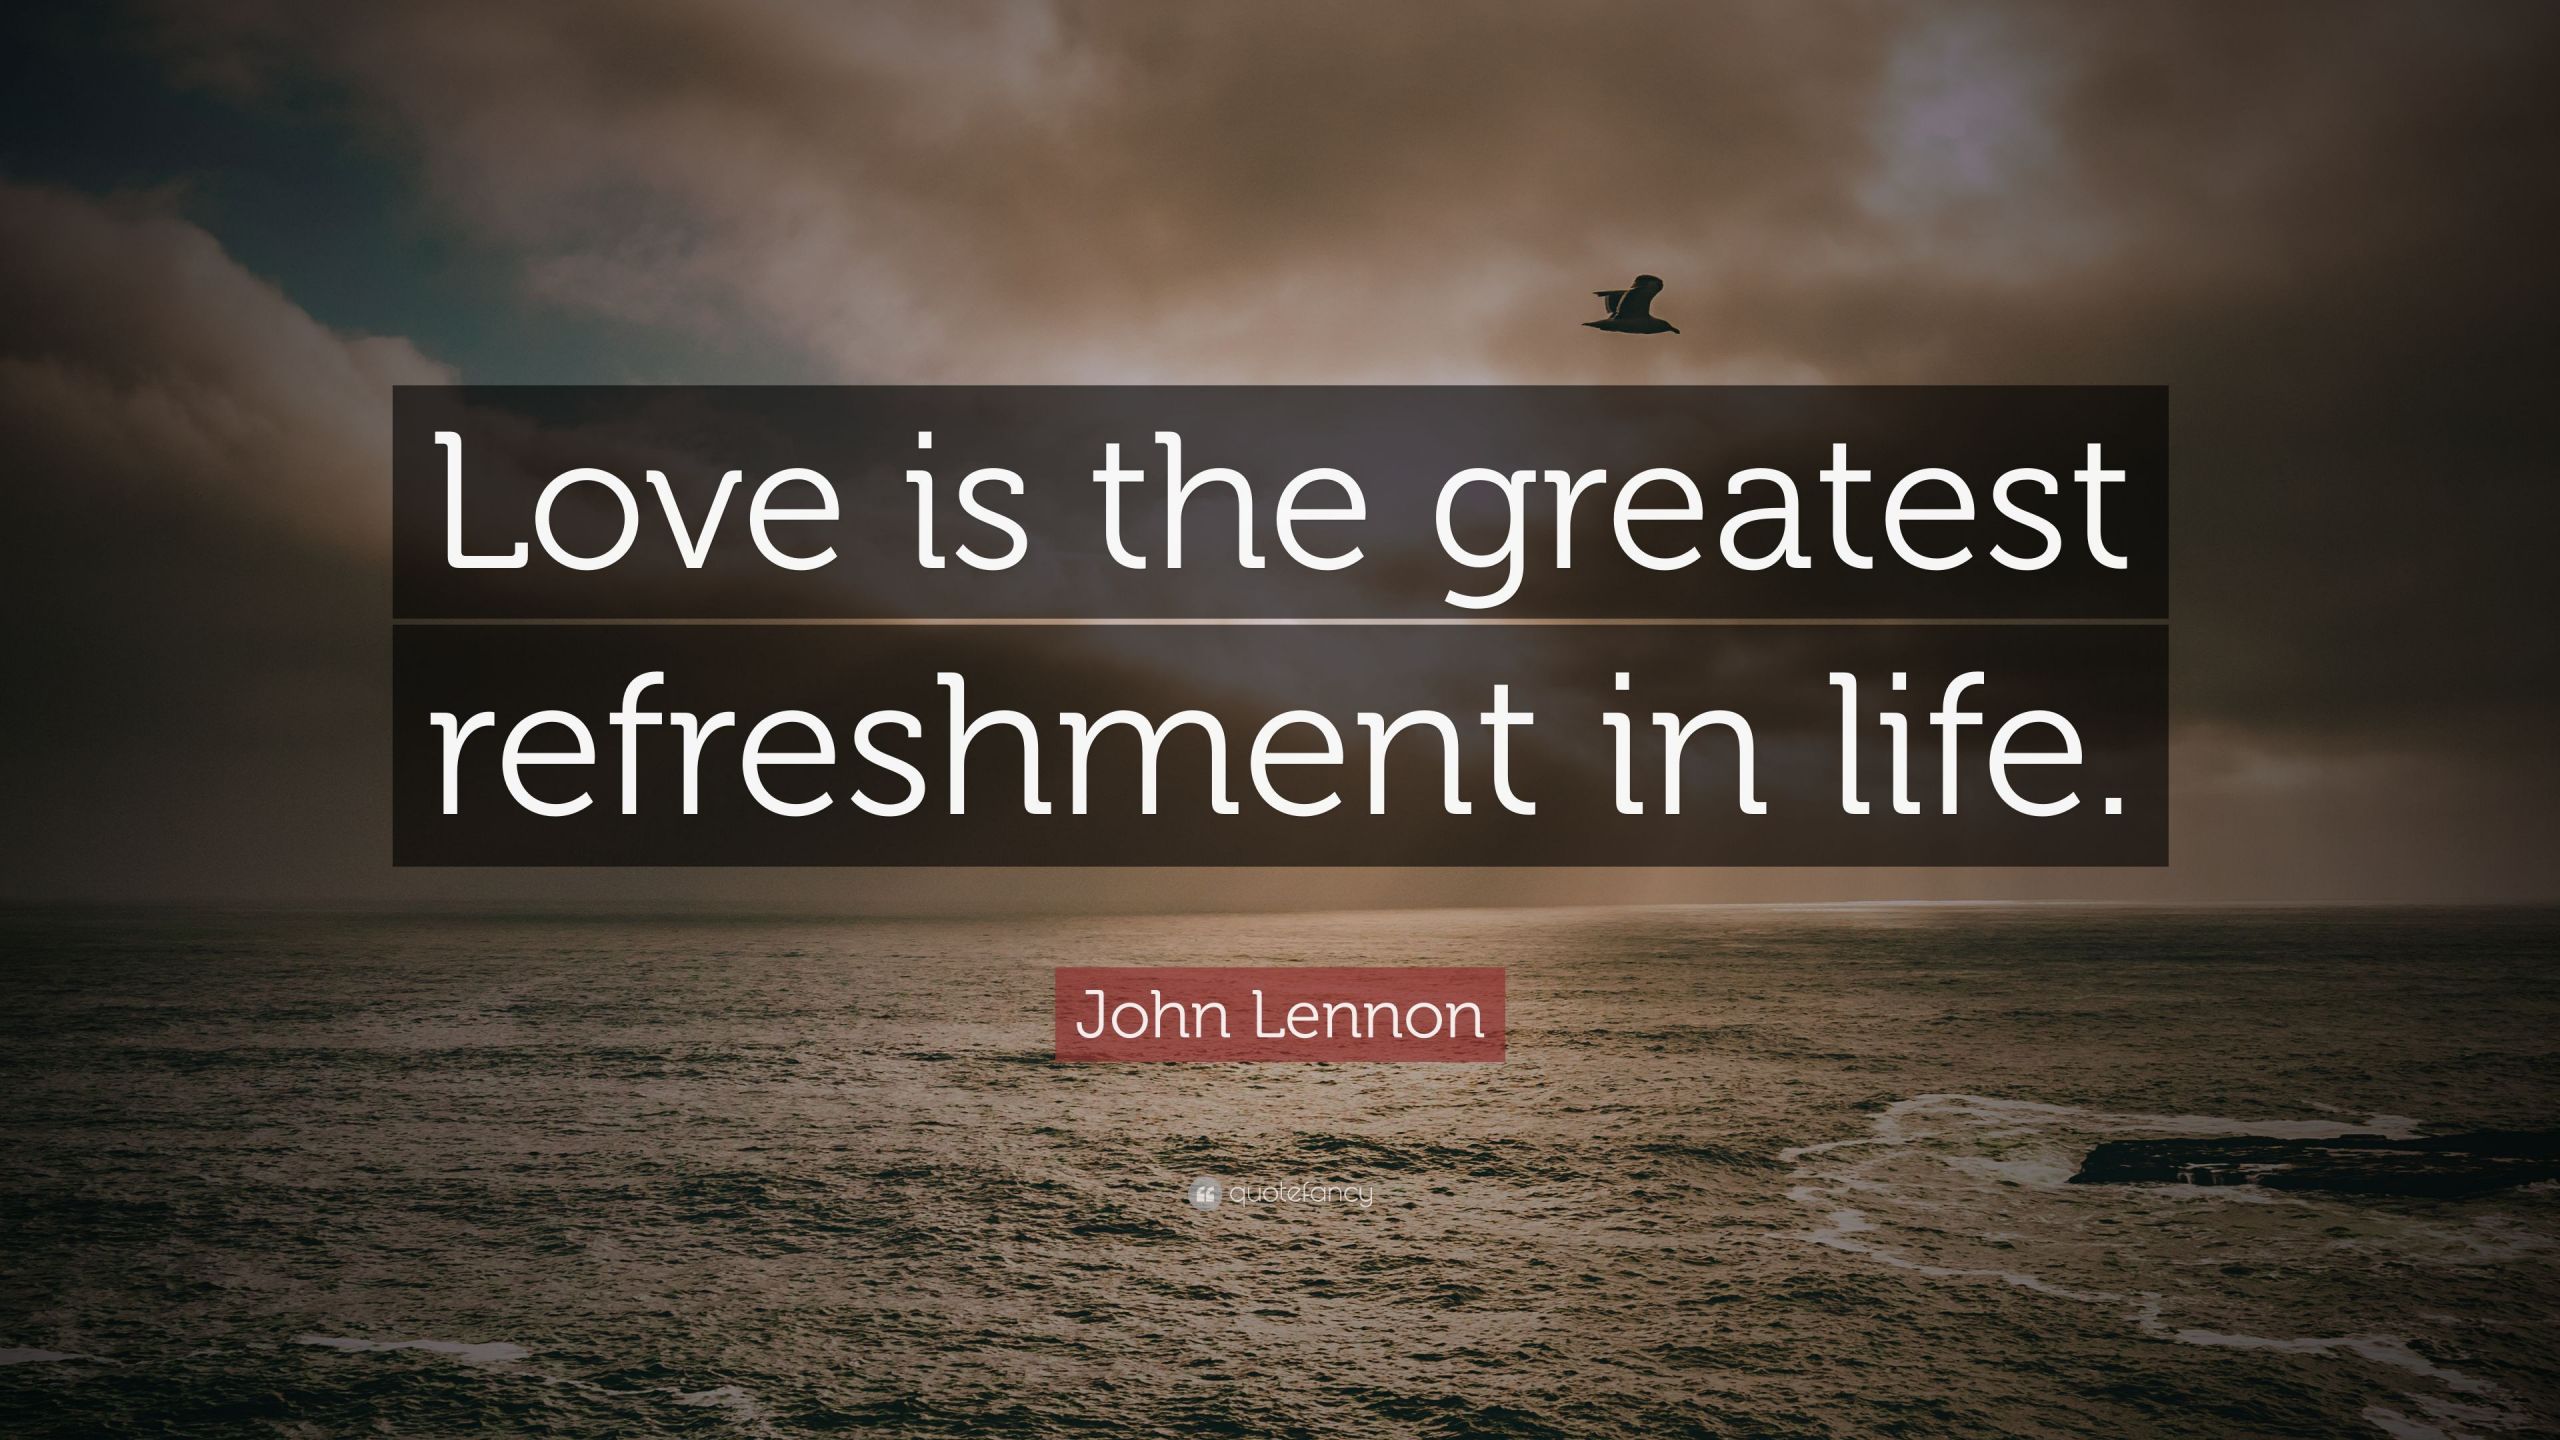 John Lennon Love Quotes
 John Lennon Quote “Love is the greatest refreshment in